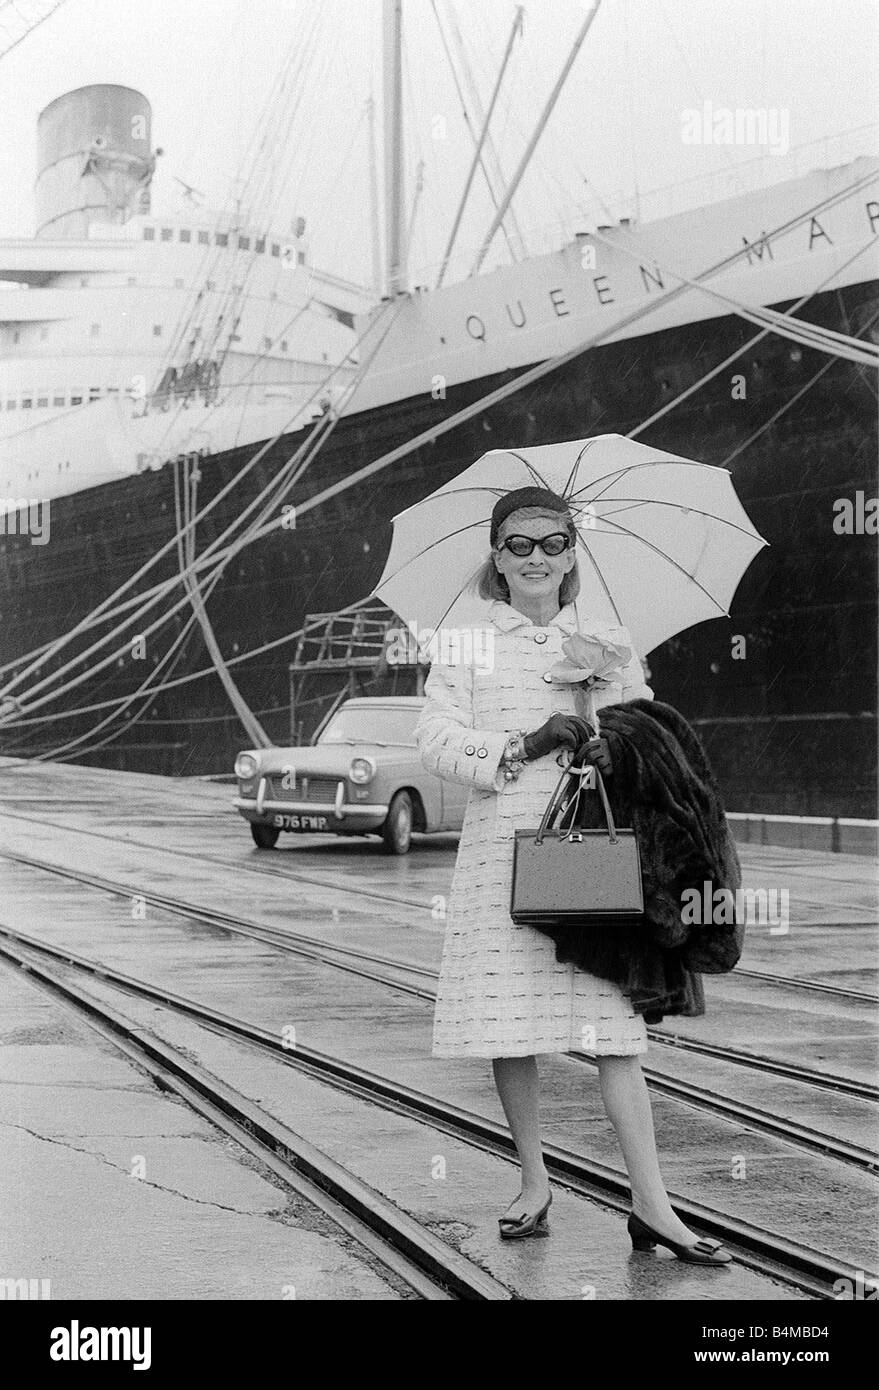 Bette Davis April 1967 Actress on the Southampton Quayside by the Queen Mary com Stock Photo